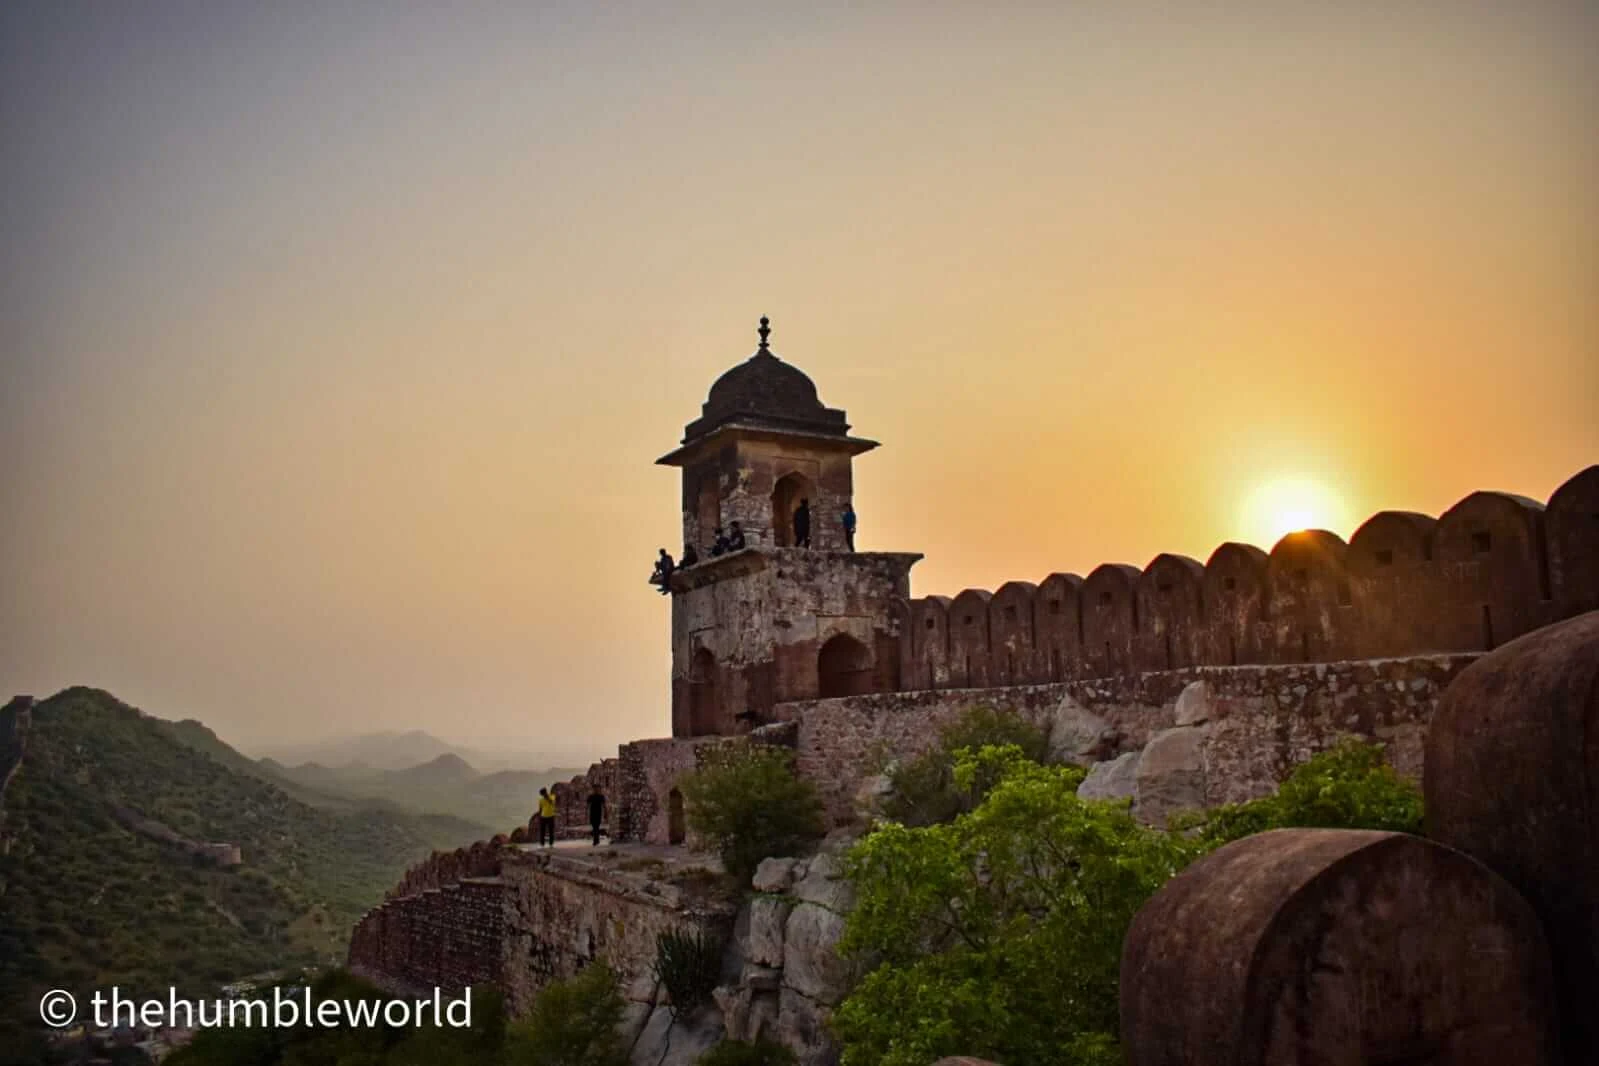 Captured this beautiful sunrise from Amer Fort Watch Tower